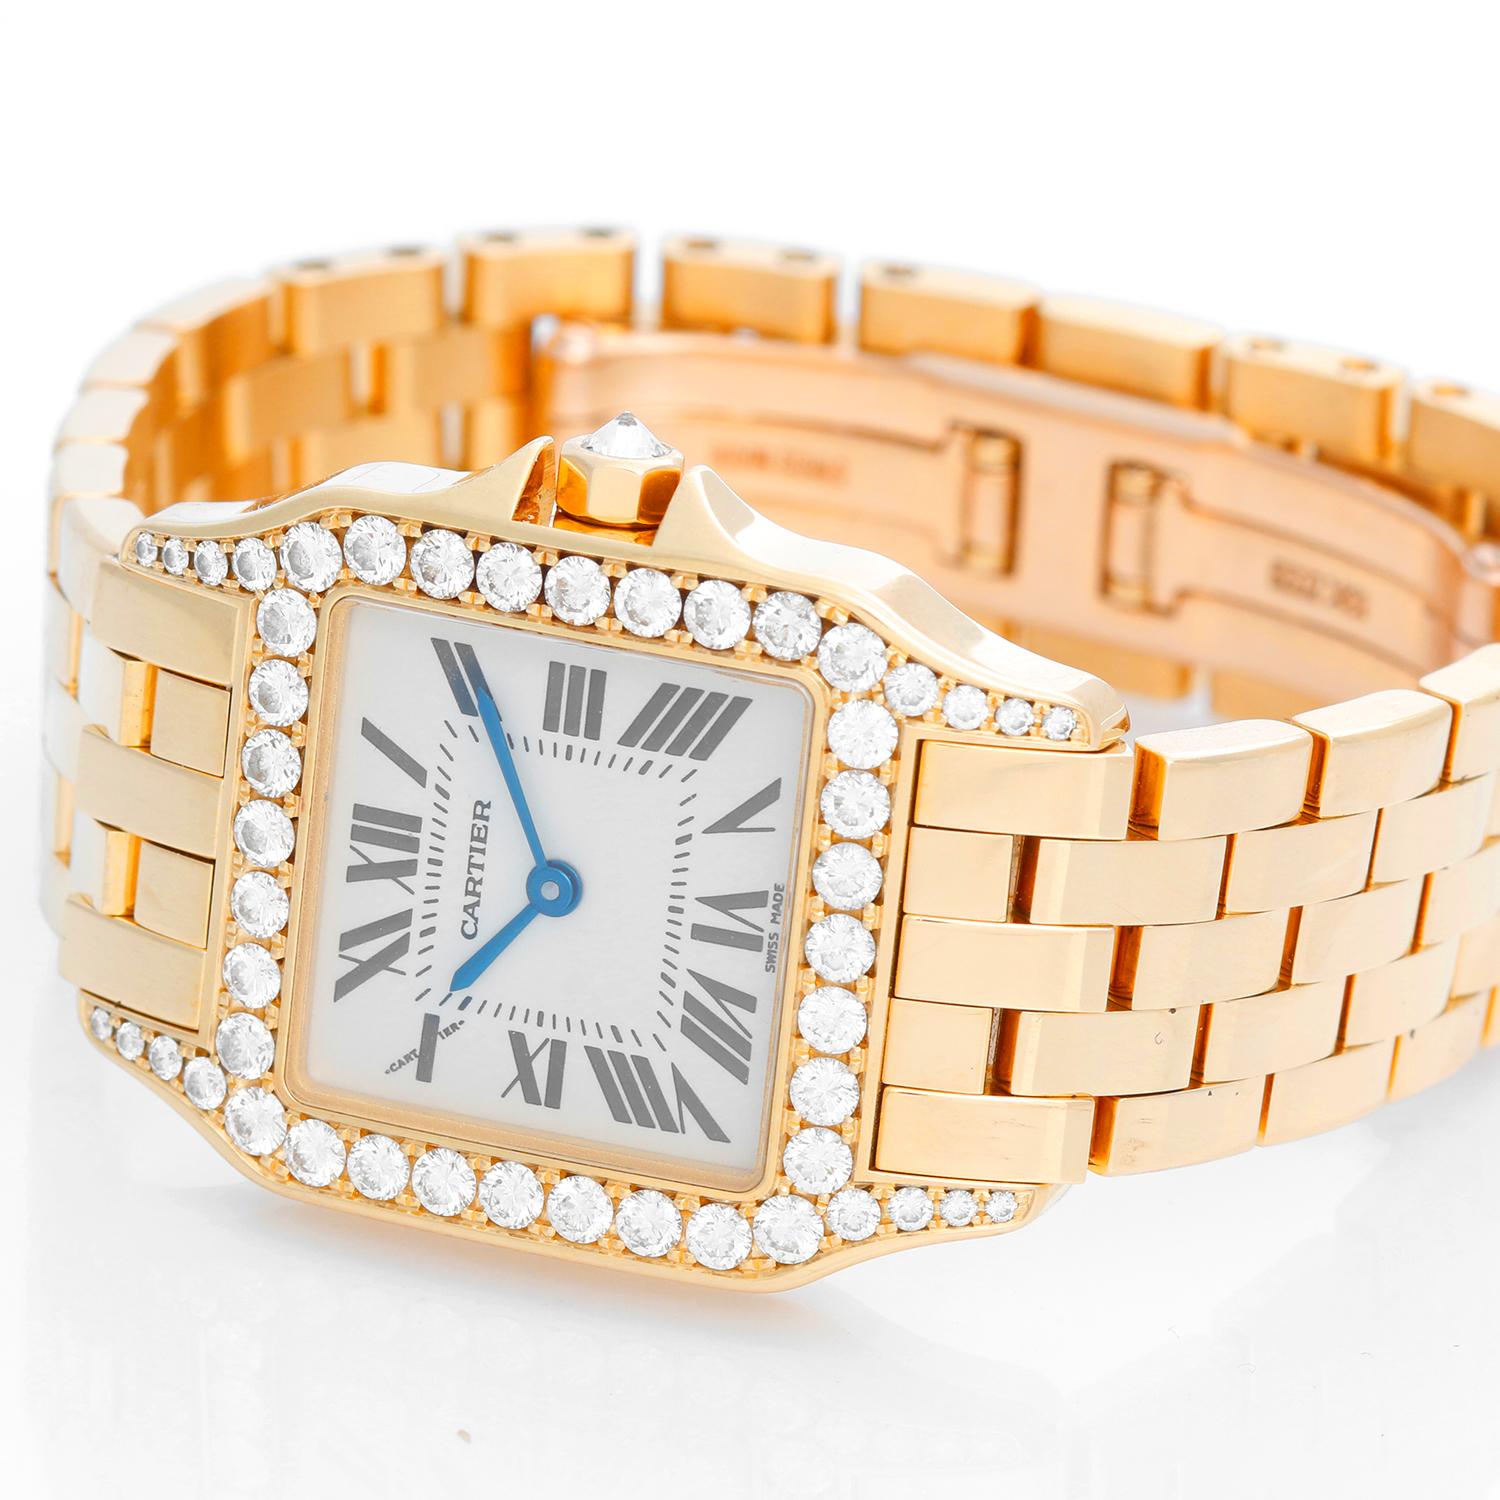 Cartier Santos Demoiselle 18k Yellow Gold Midsize Watch WF9002Y7 - Quartz. 18k yellow gold case with a diamond bezel and lugs  (26mm x 38mm). Ivory colored dial with black Roman numerals. 18k yellow gold Cartier bracelet with deployant clasp.